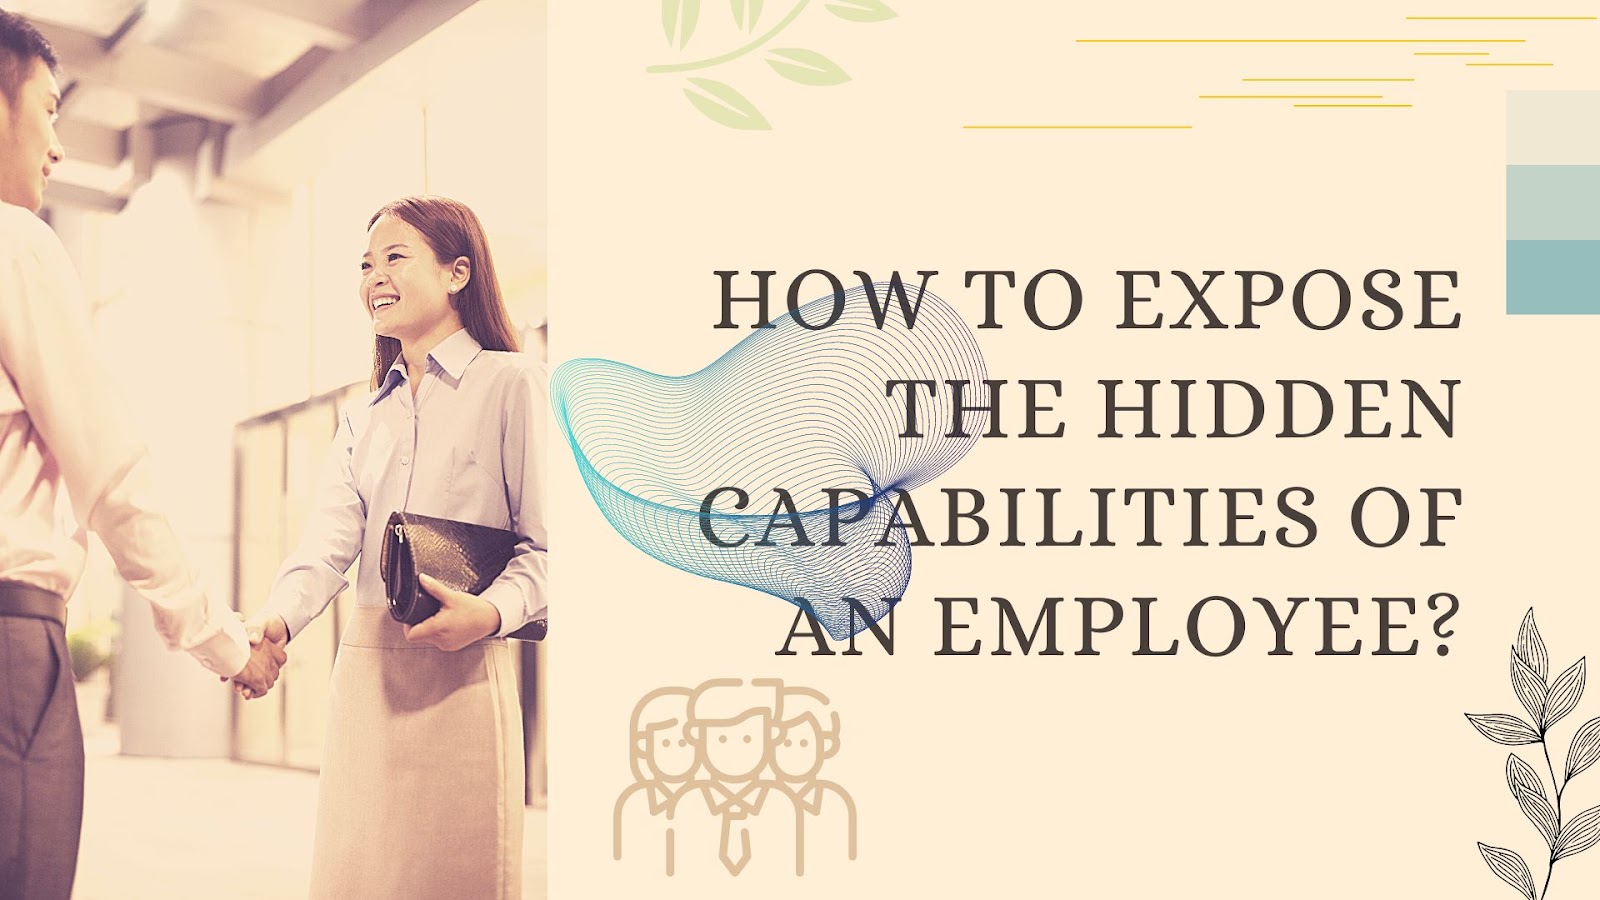 How to Expose the Hidden Capabilities of an Employee?